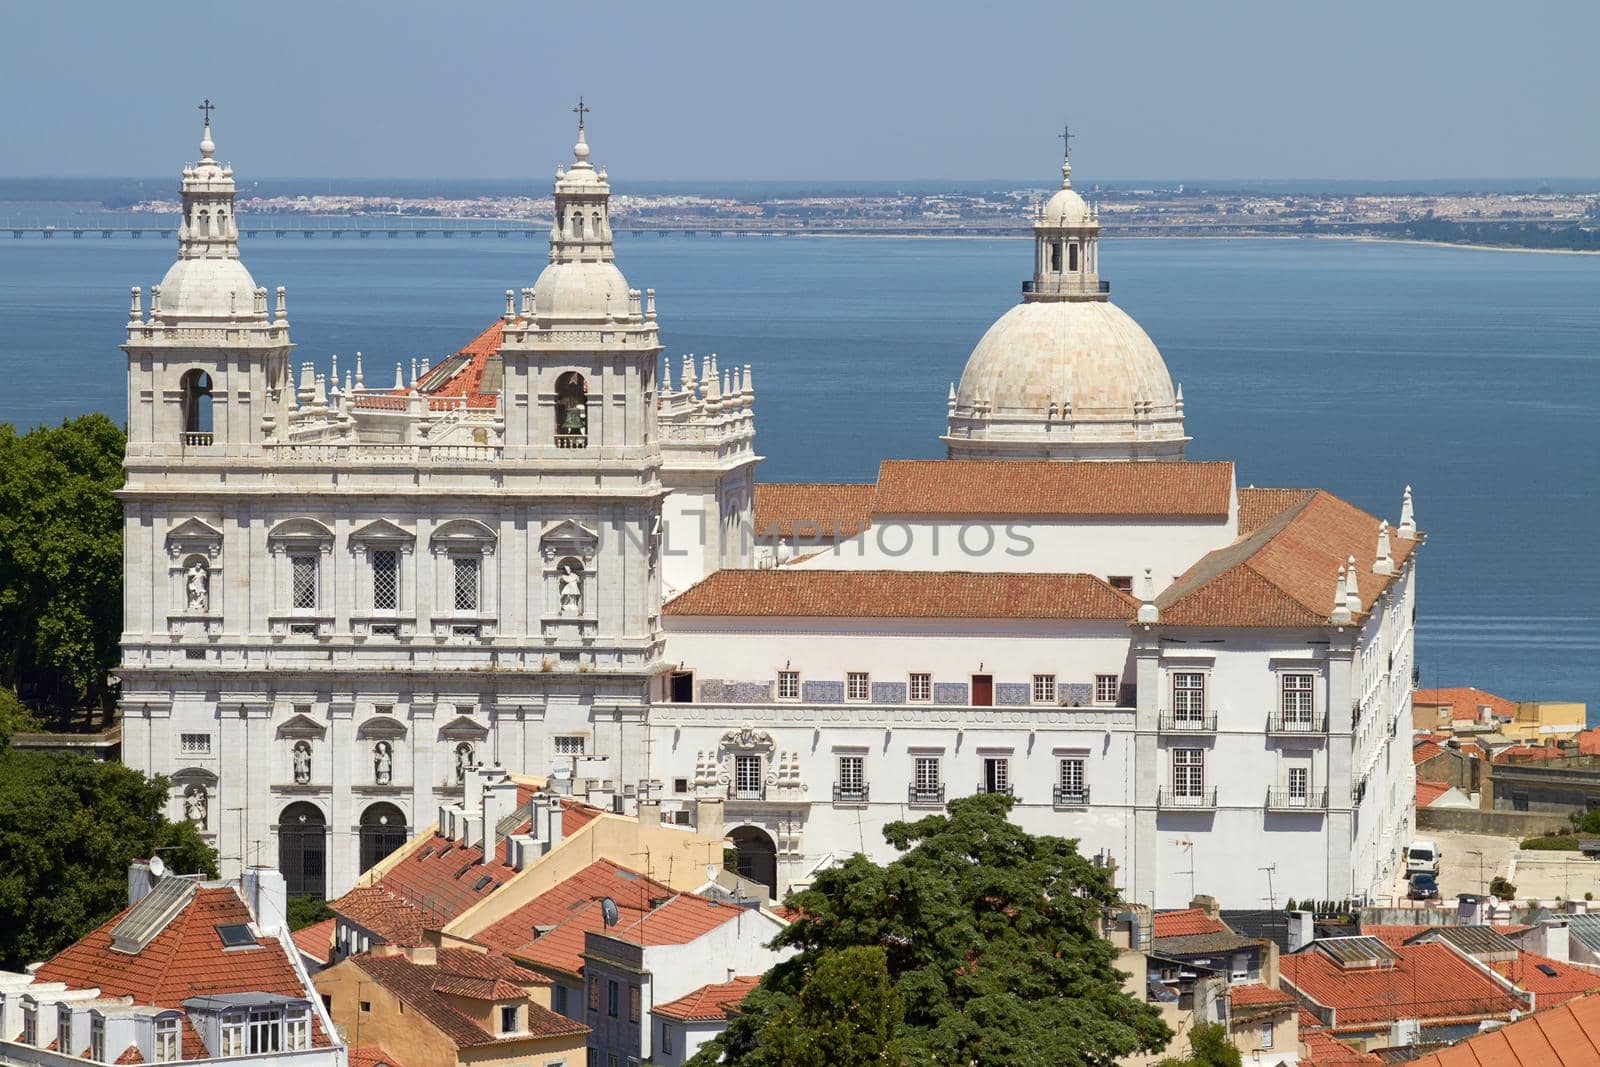 Church of Santa Engracia, Lisbon, Portugal with the ocean in the background